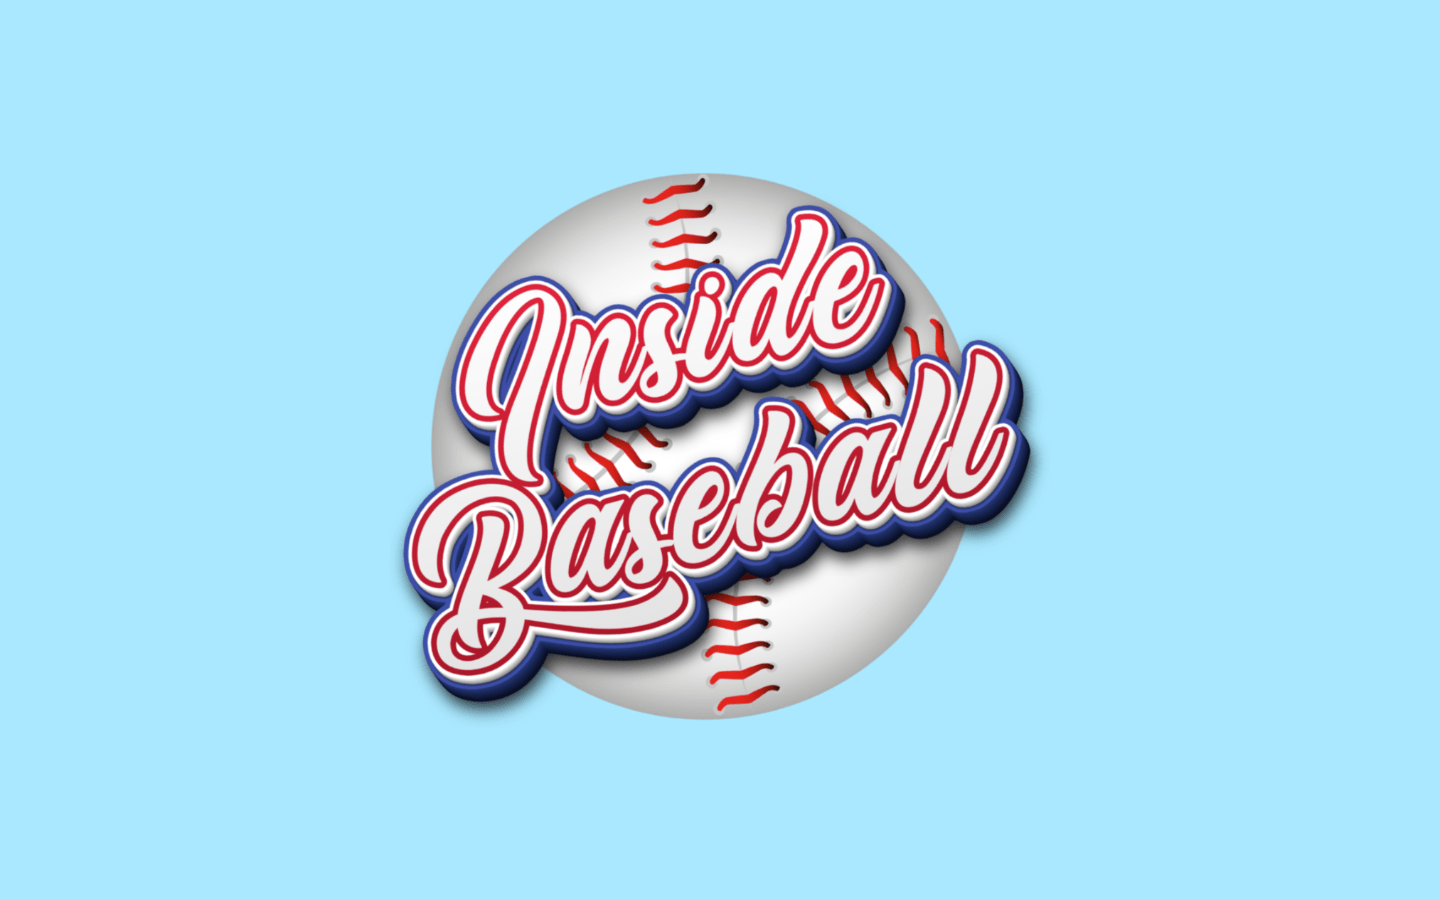 The words "inside Baseball" over an image of a baseball, on a light blue background